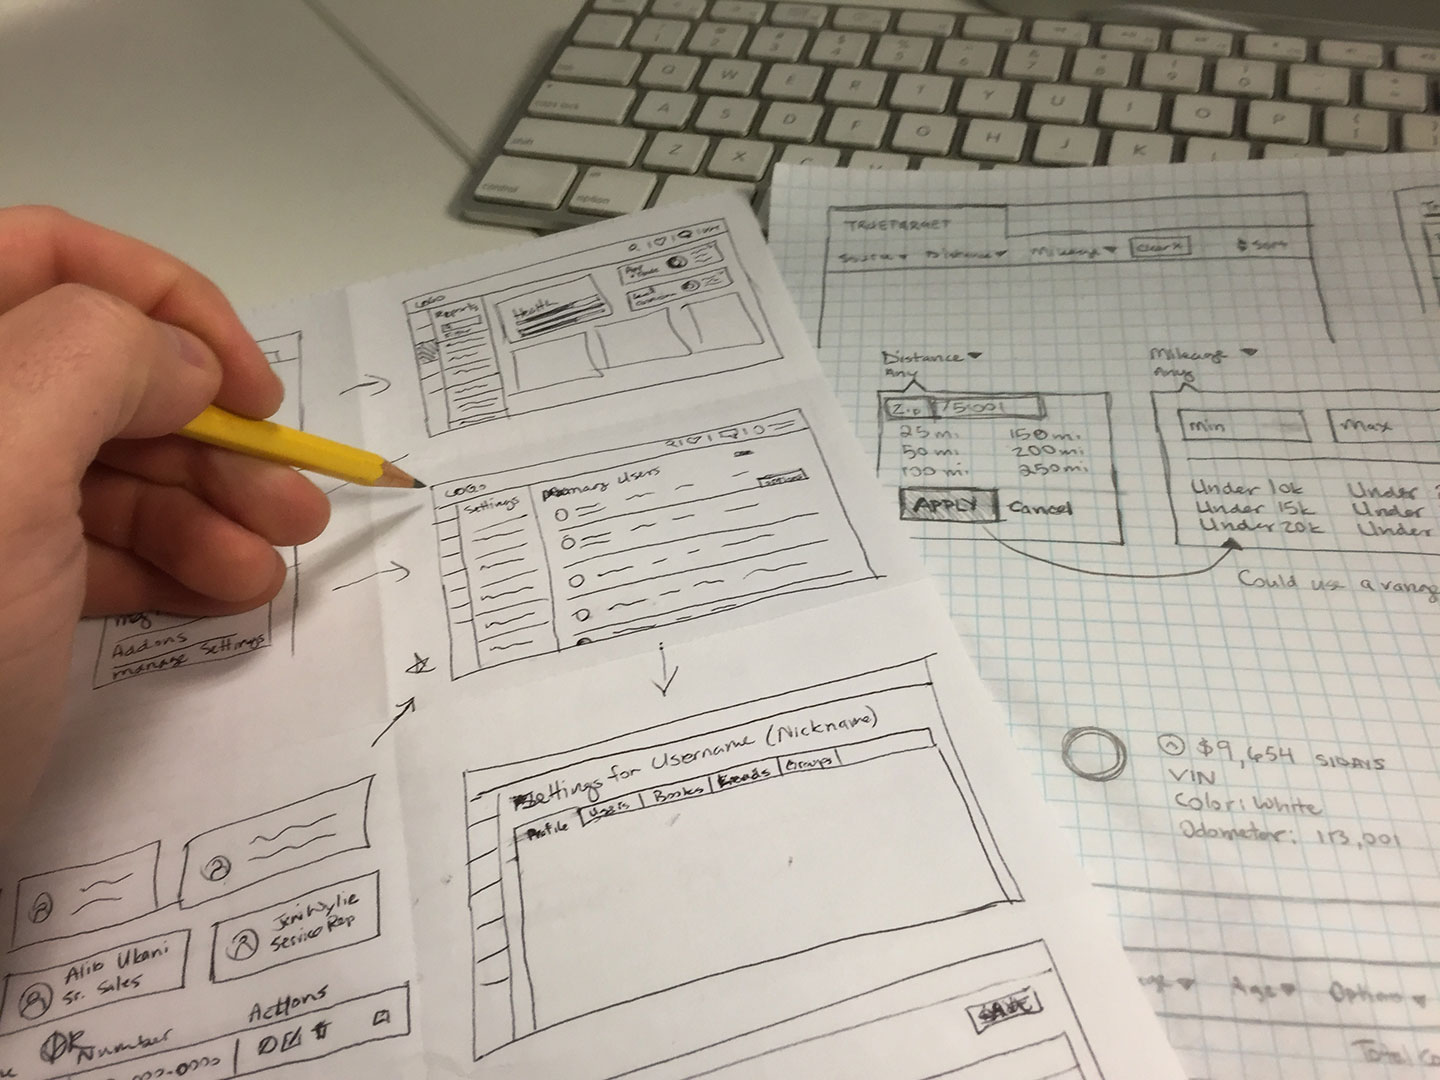 Chris Alexander sketching wireframes and journey maps on paper